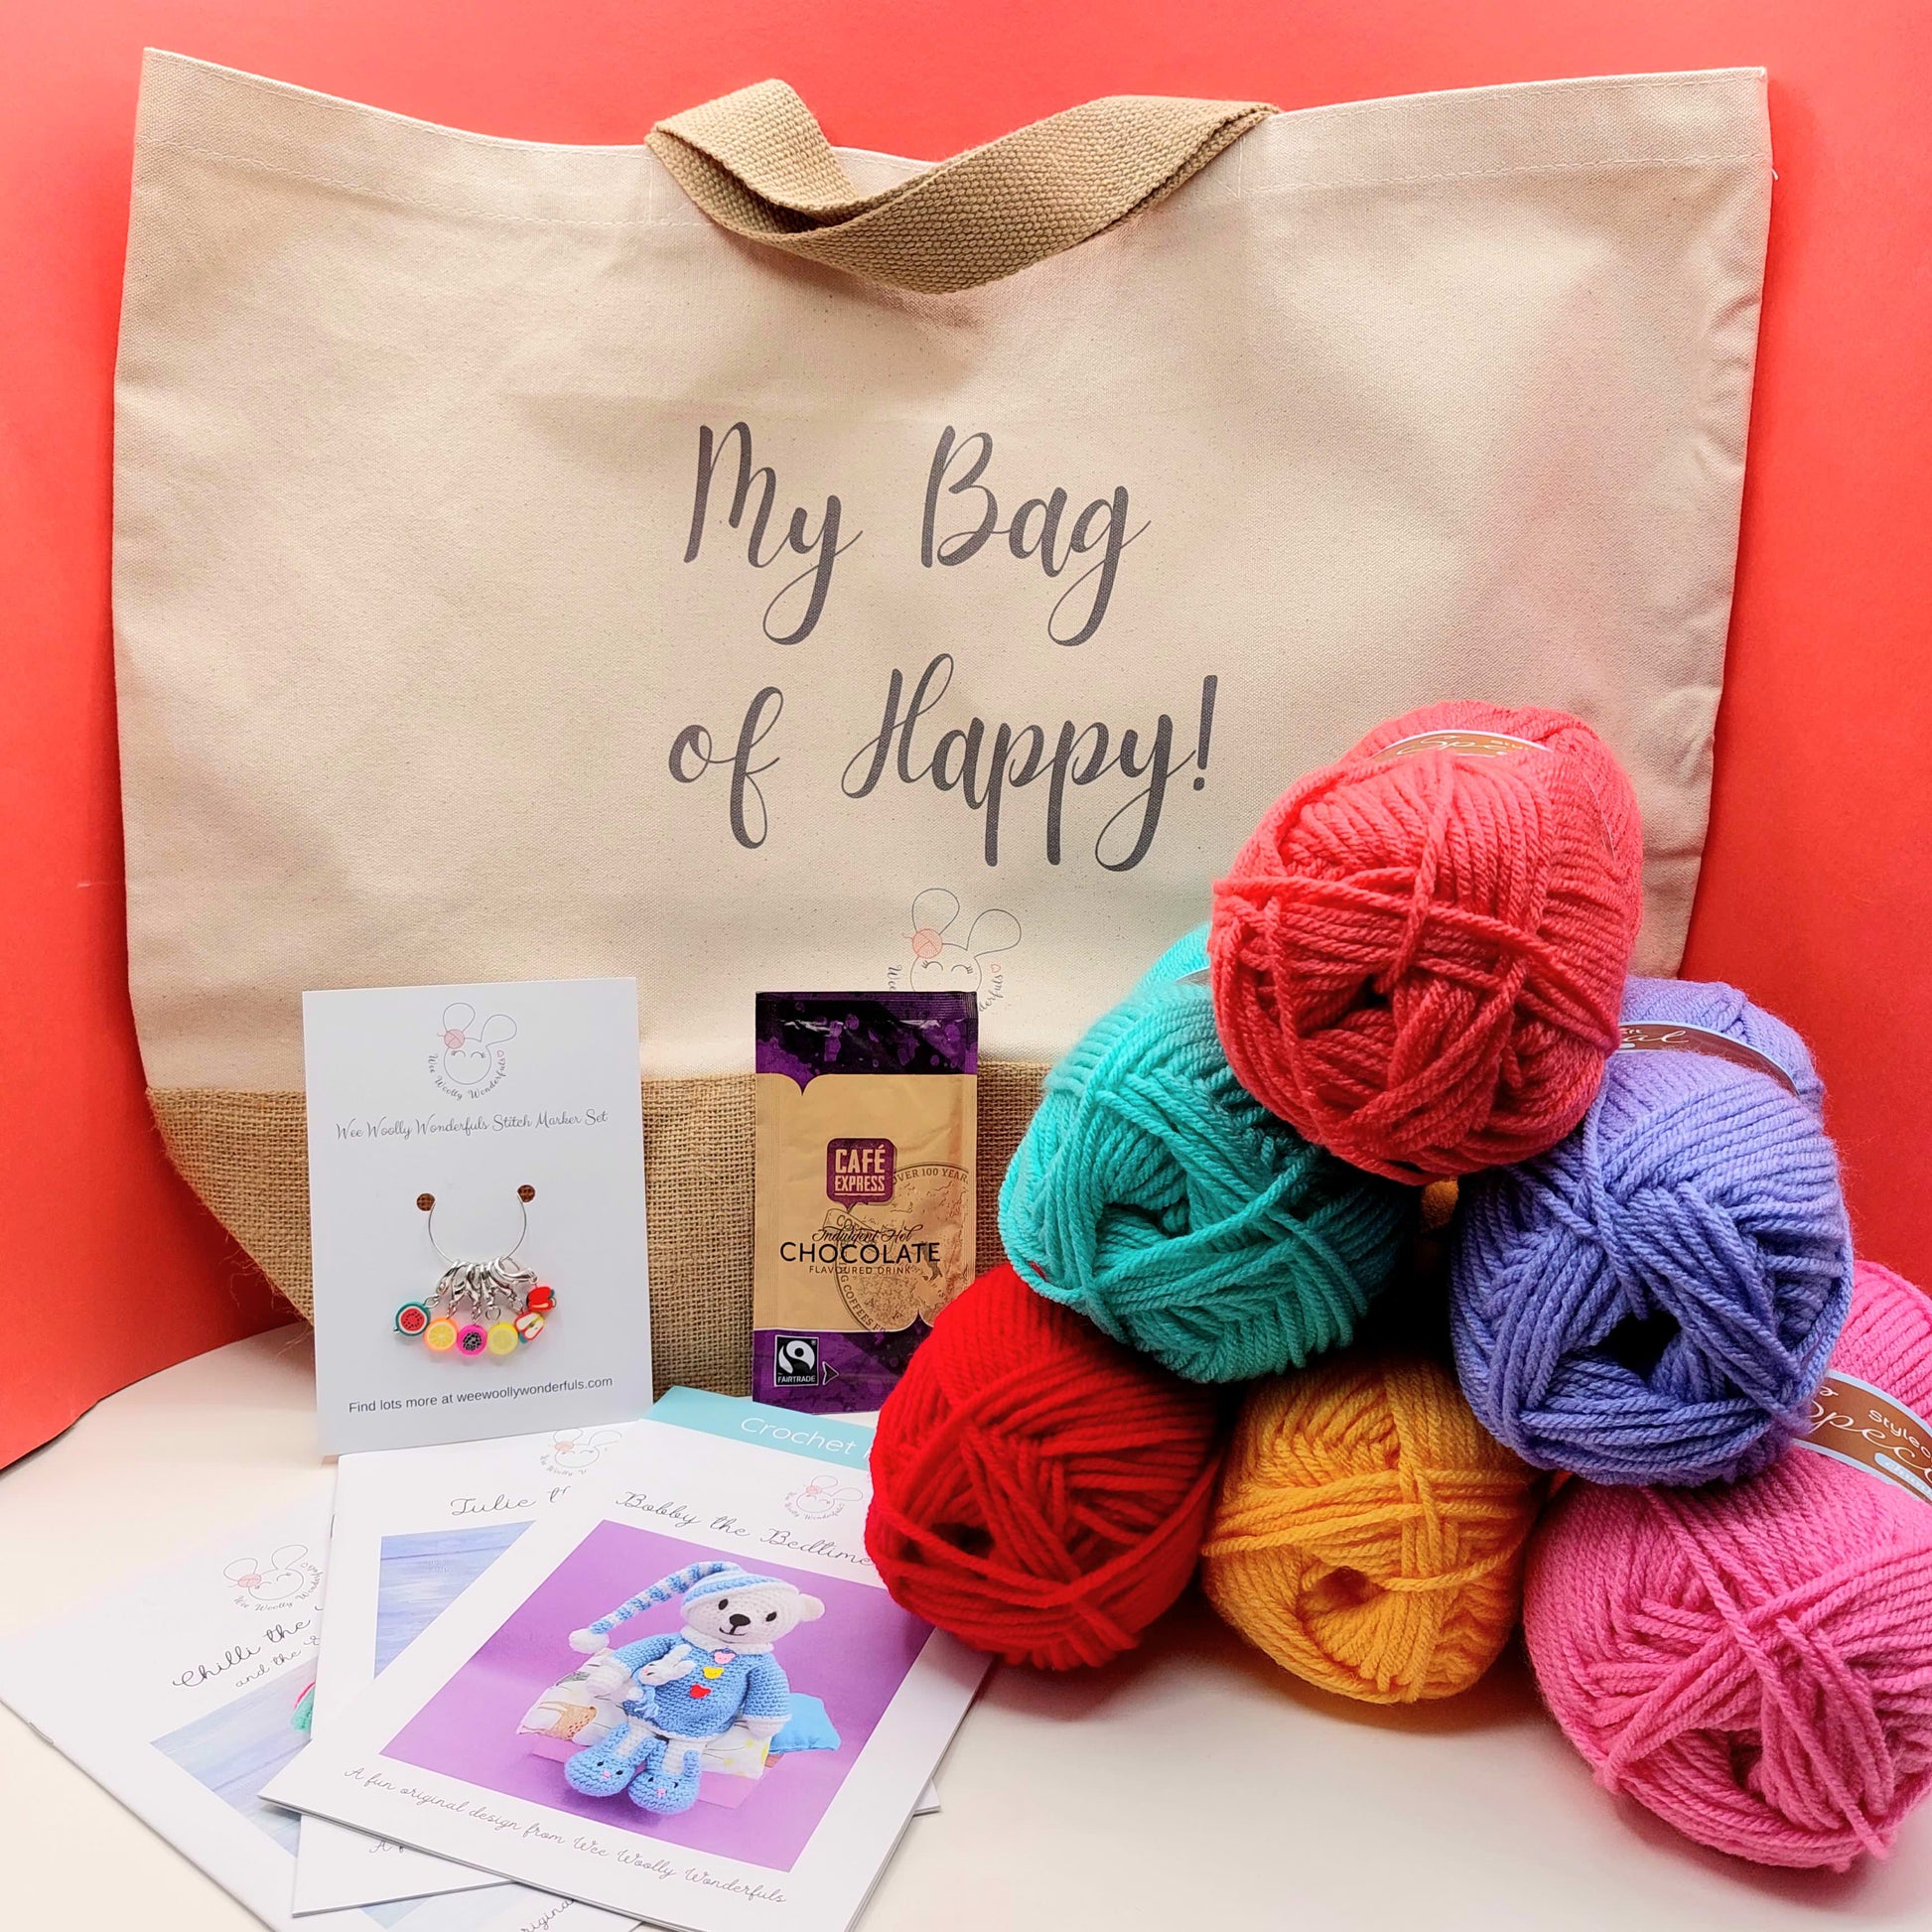 Contents of Crochet Gift Bag including wool and crochet patterns